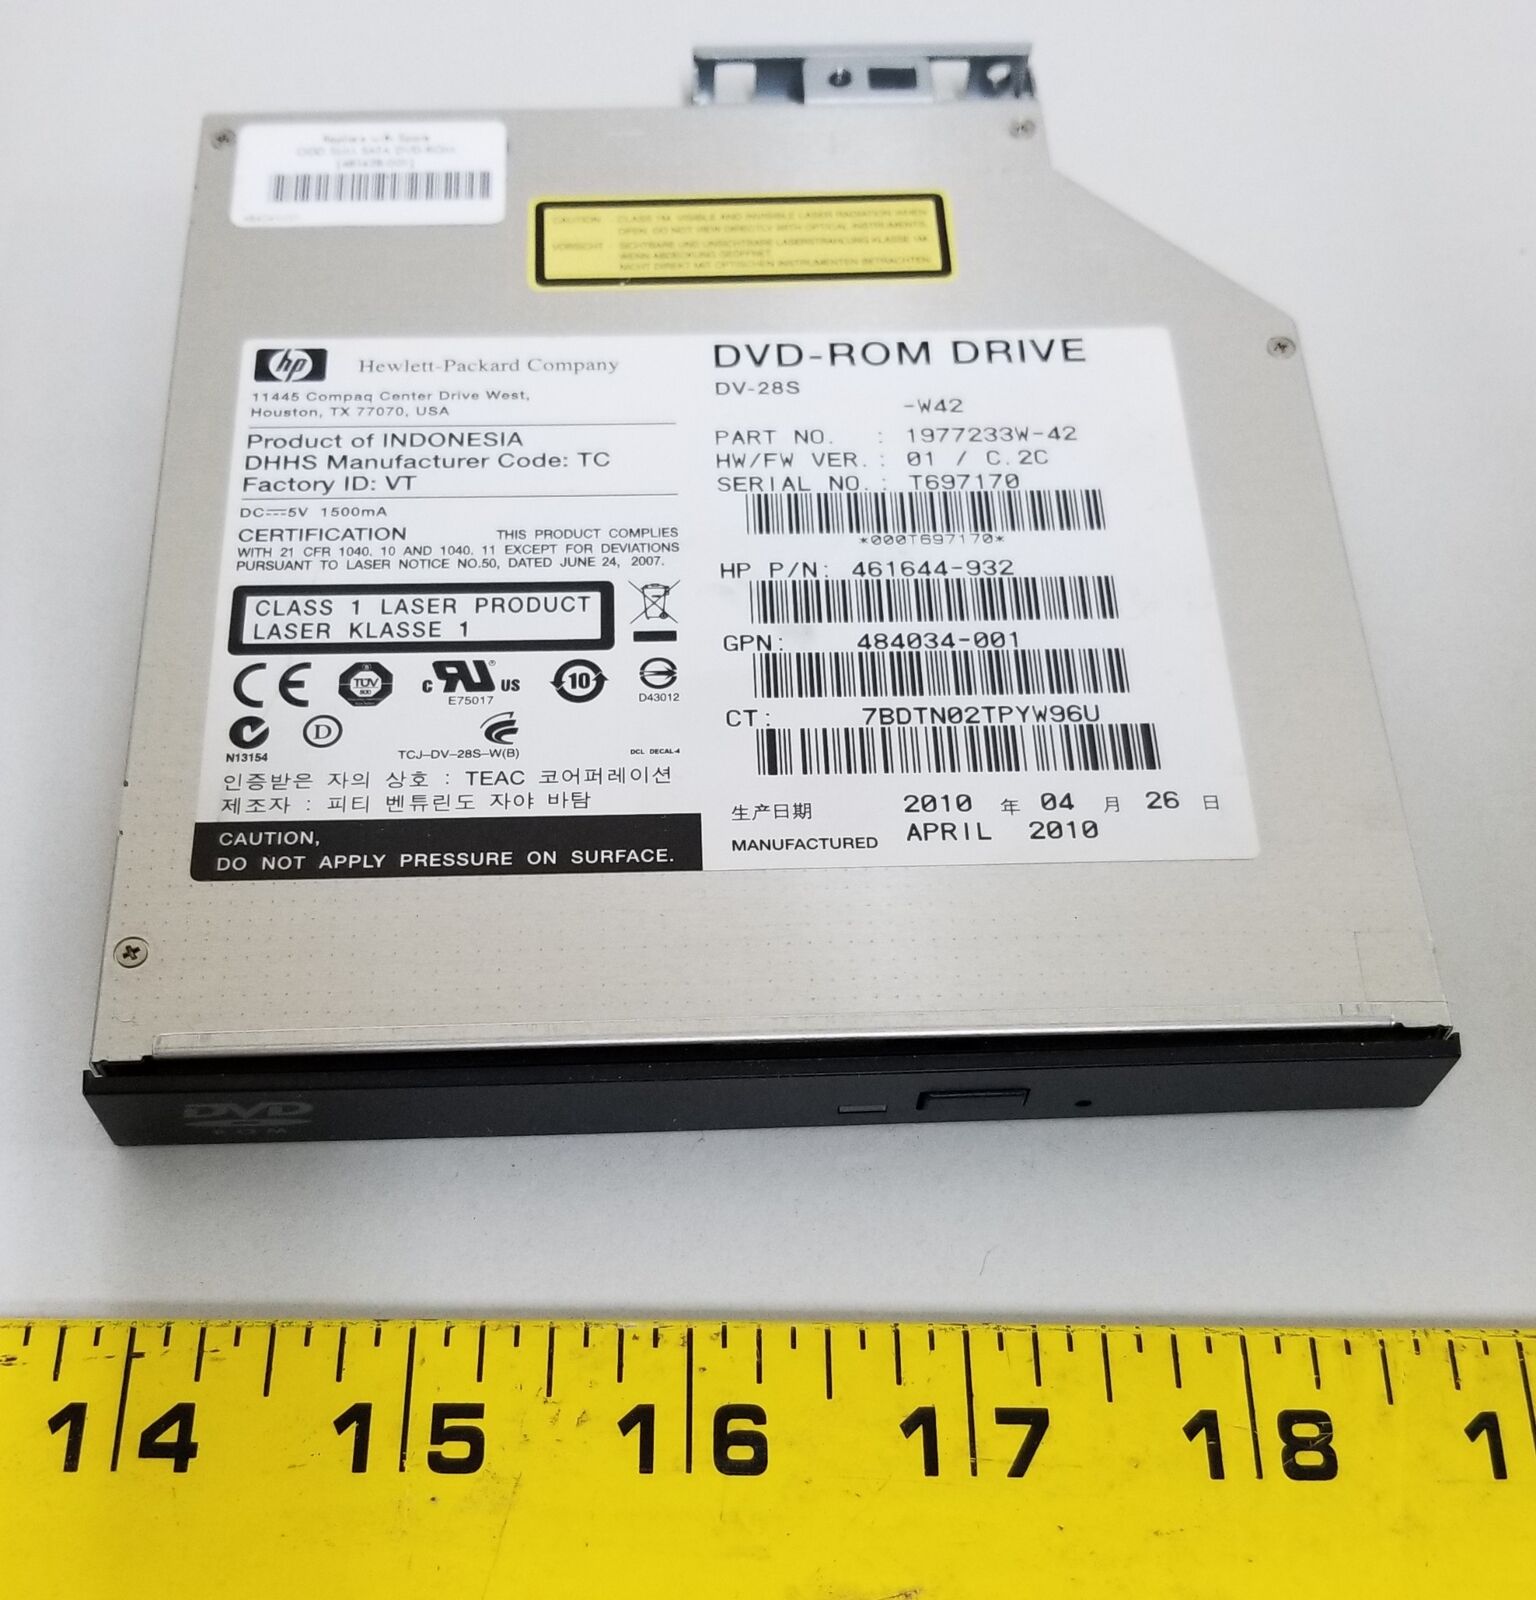 HP DVD-ROM Drive from HP ProLiant DL385 G5 484034-001